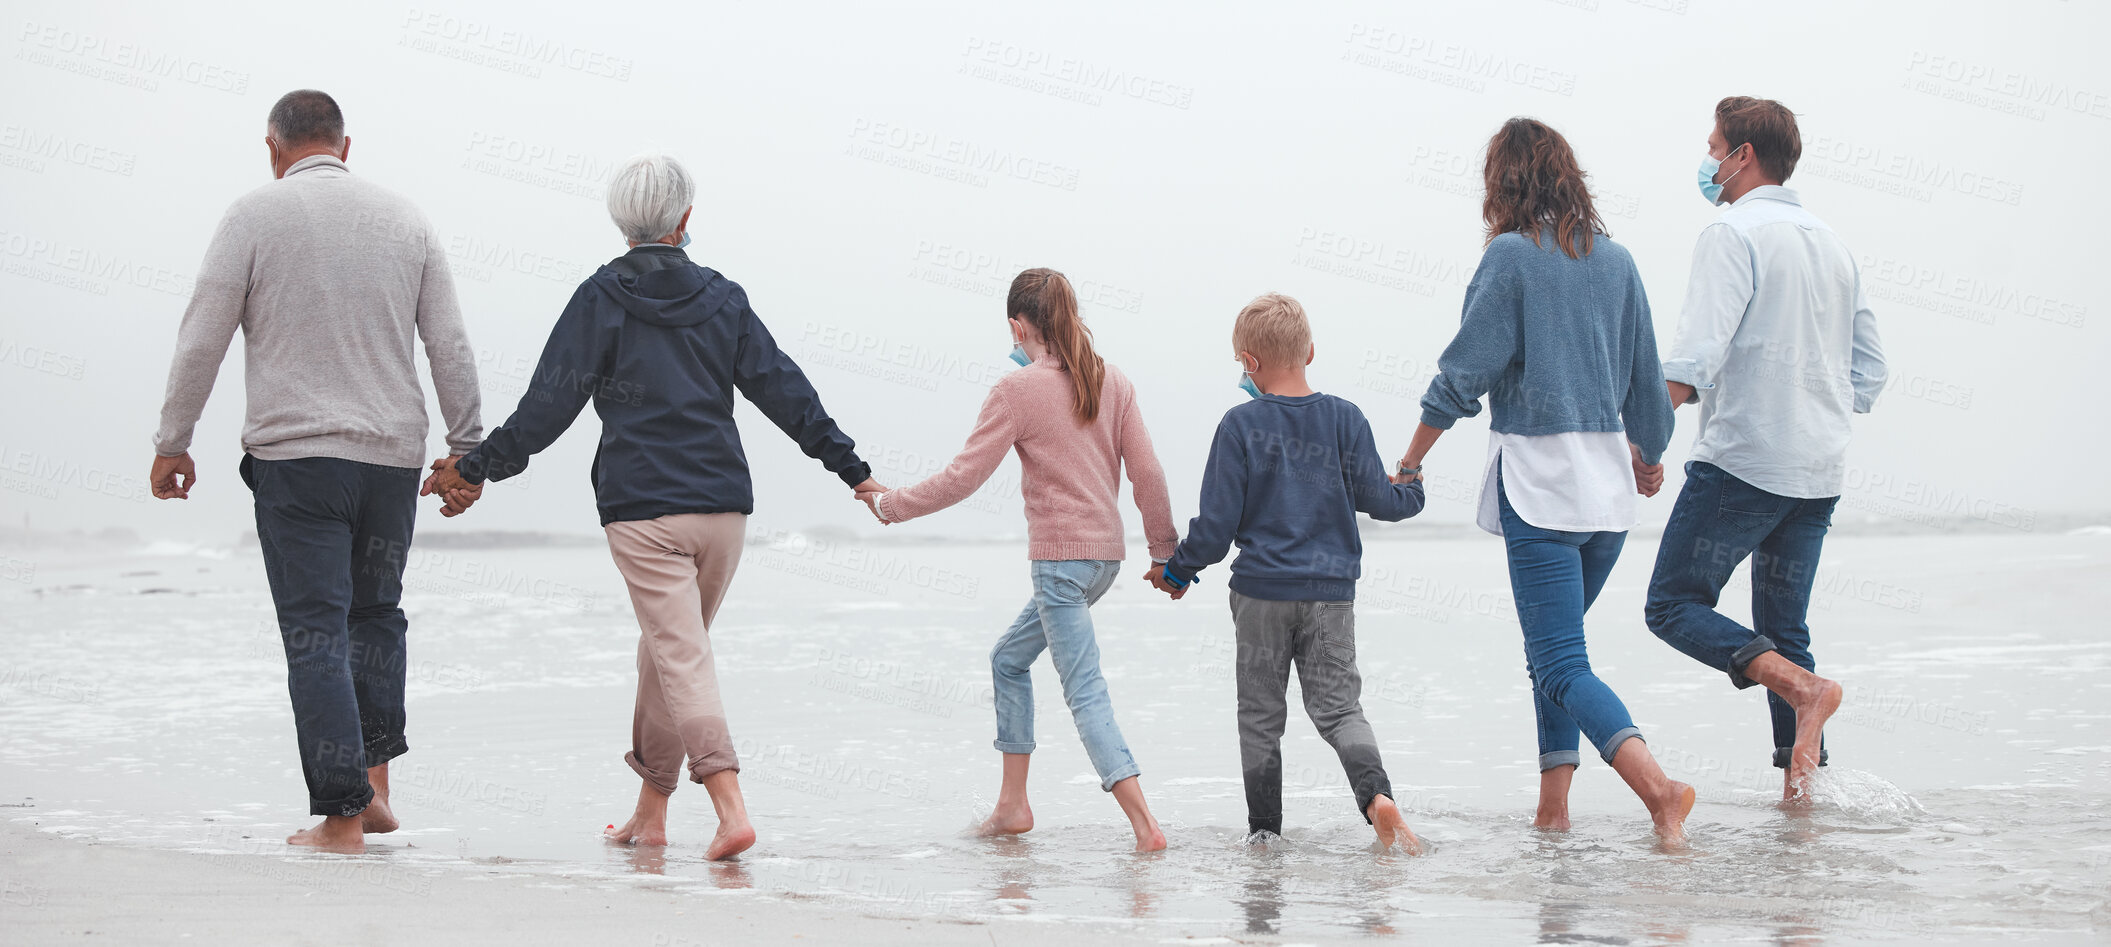 Buy stock photo Big family, holding hands and walking on beach for vacation or quality bonding time together in nature. Hand of parents, grandparents and kids enjoying travel, freedom and family fun in ocean water